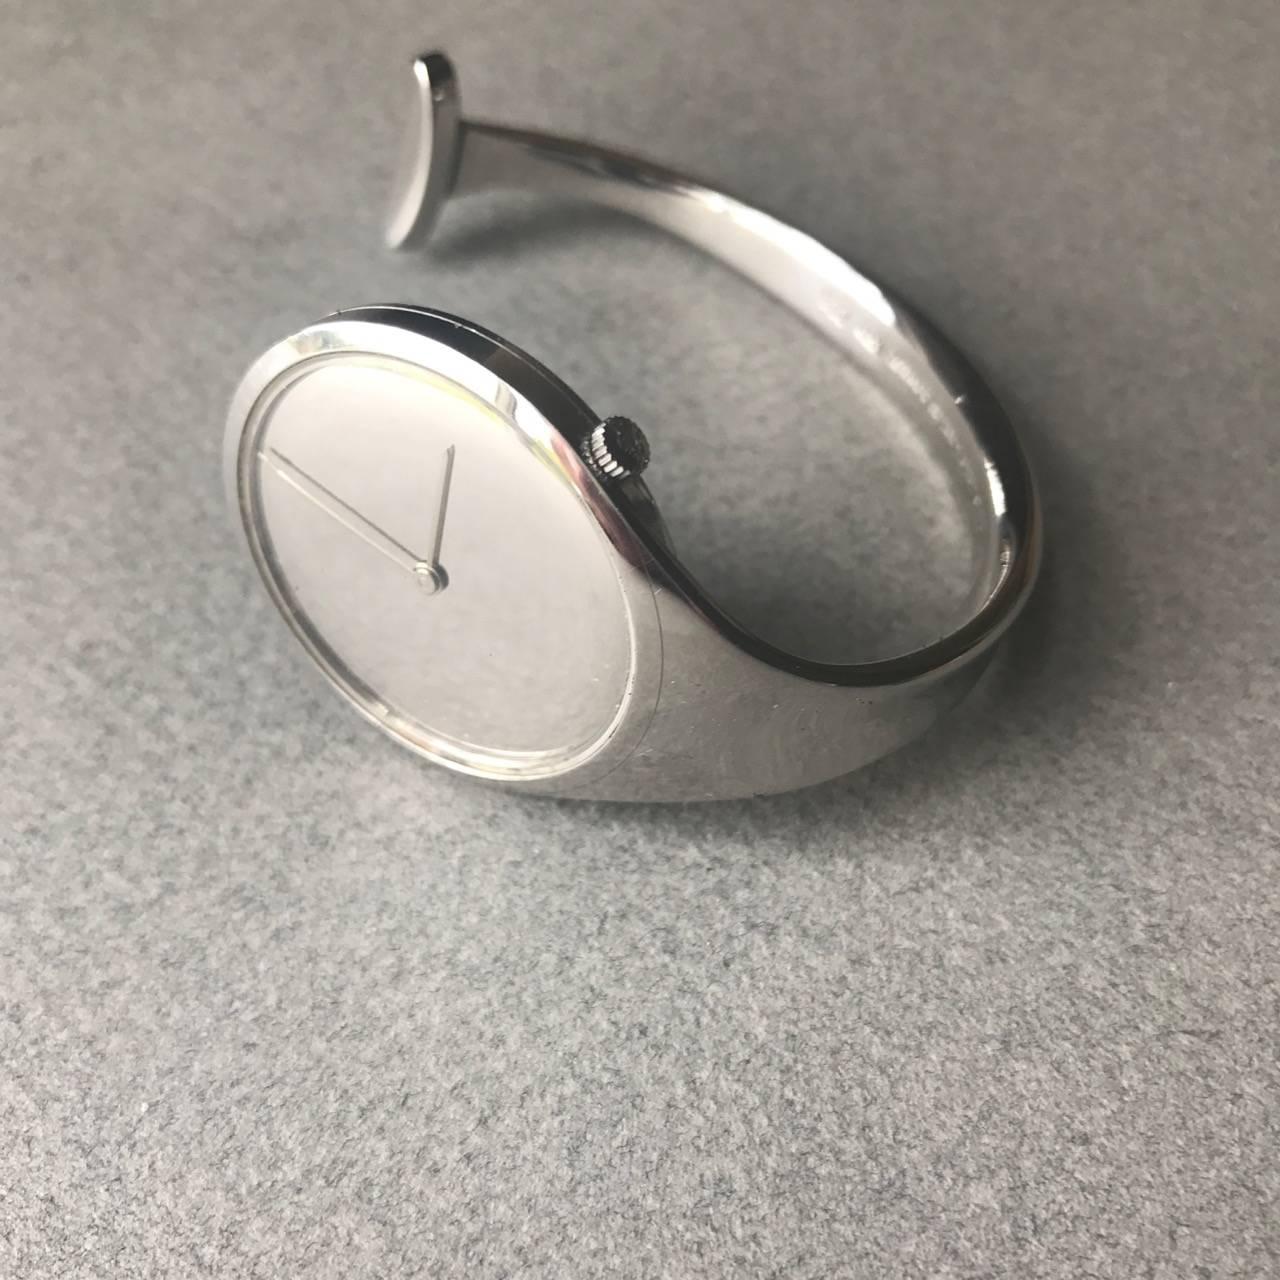 Georg Jensen "Vivianna" Watch, No. 226

This iconic watch comes to us from the original owner who purchased it in Denmark in 1972. The stainless steel case has original movement by Chopard and even retains the original box.

This is an